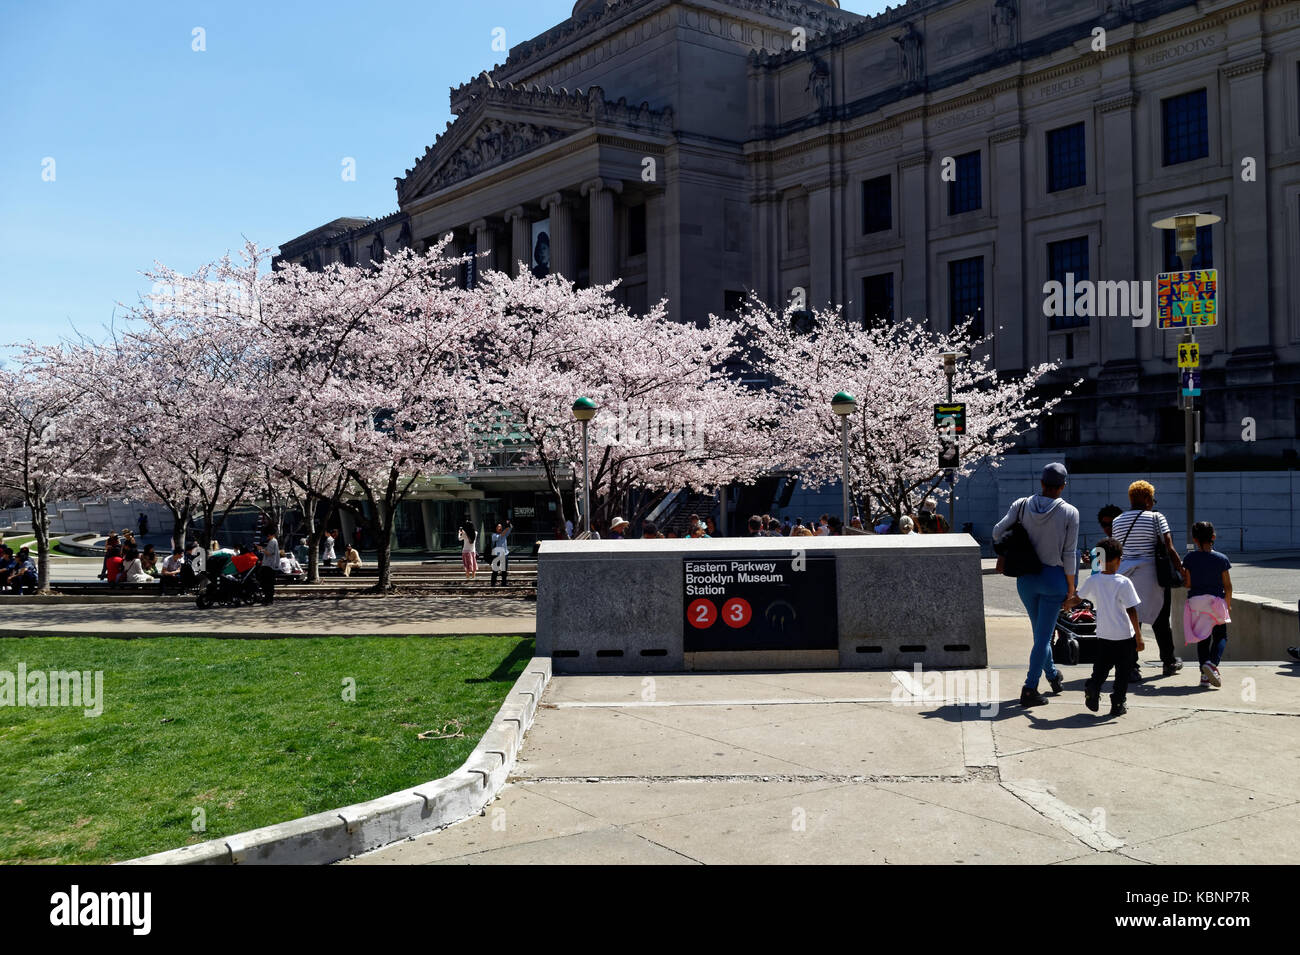 visitors and tourists arriving at the Brooklyn Museum of Art on a warm Spring day with cherry blossom trees in full bloom. Stock Photo